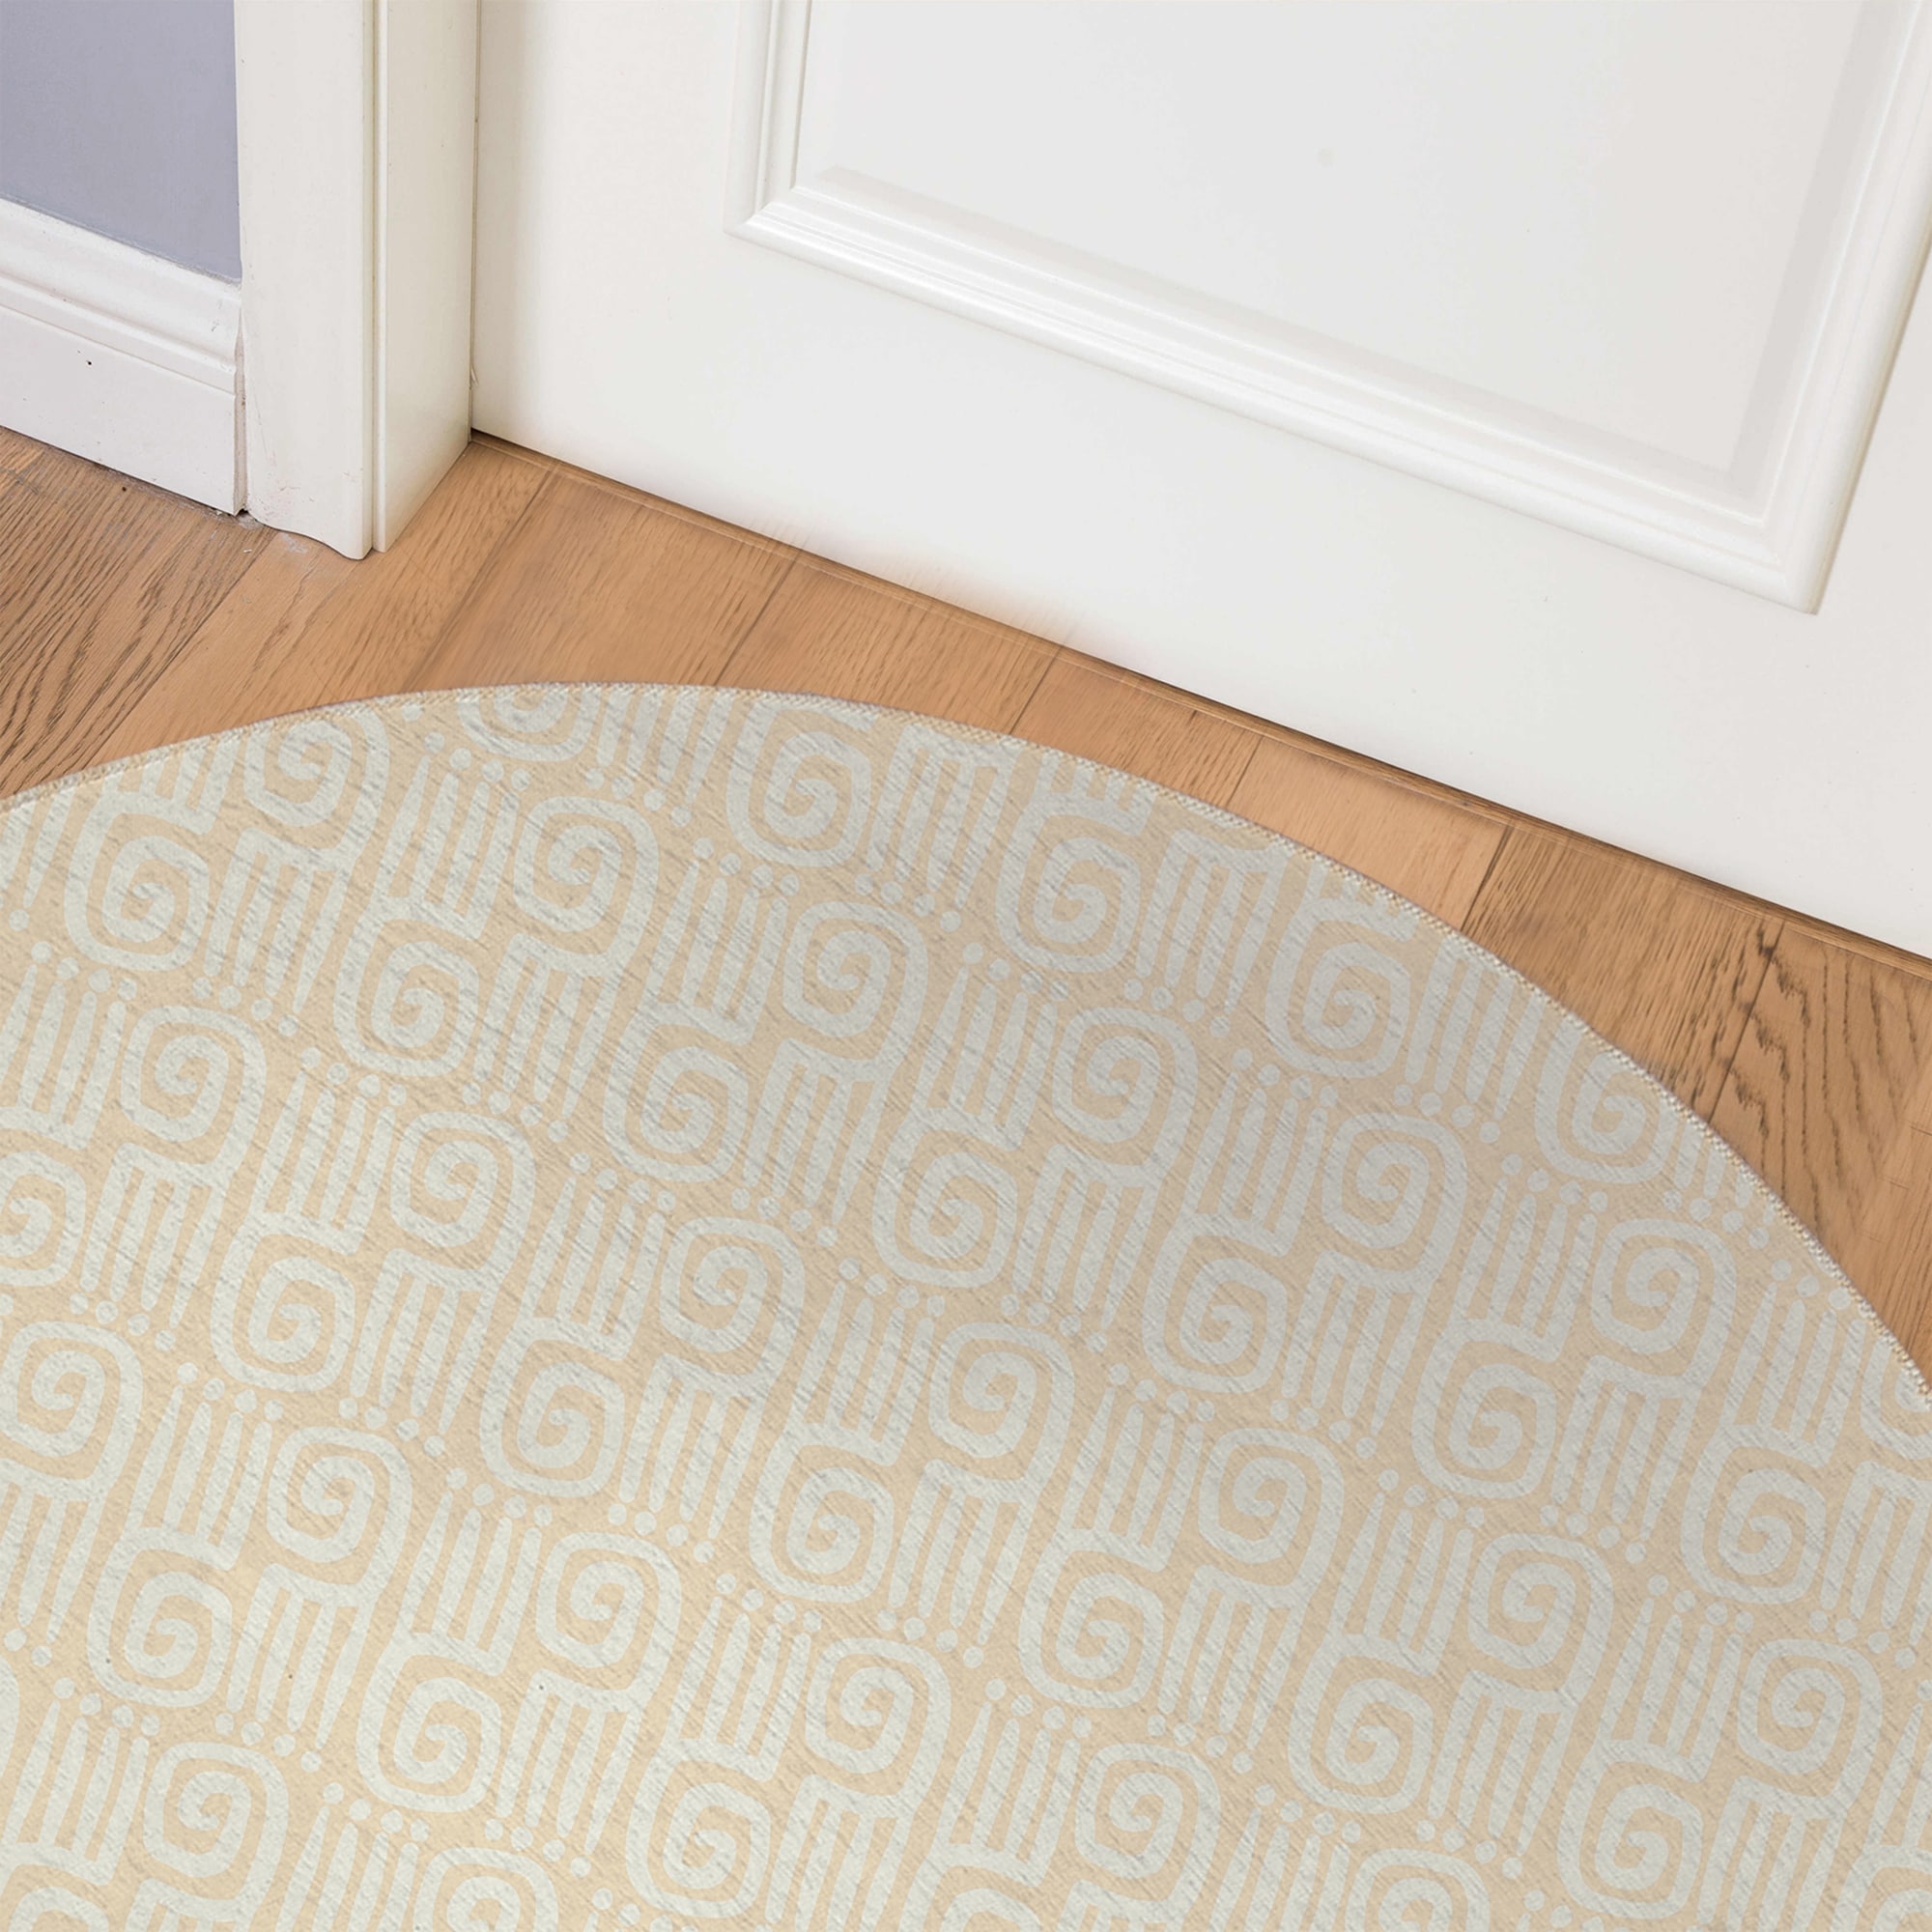 ATHENS WHITE Indoor Floor Mat By Kavka Designs